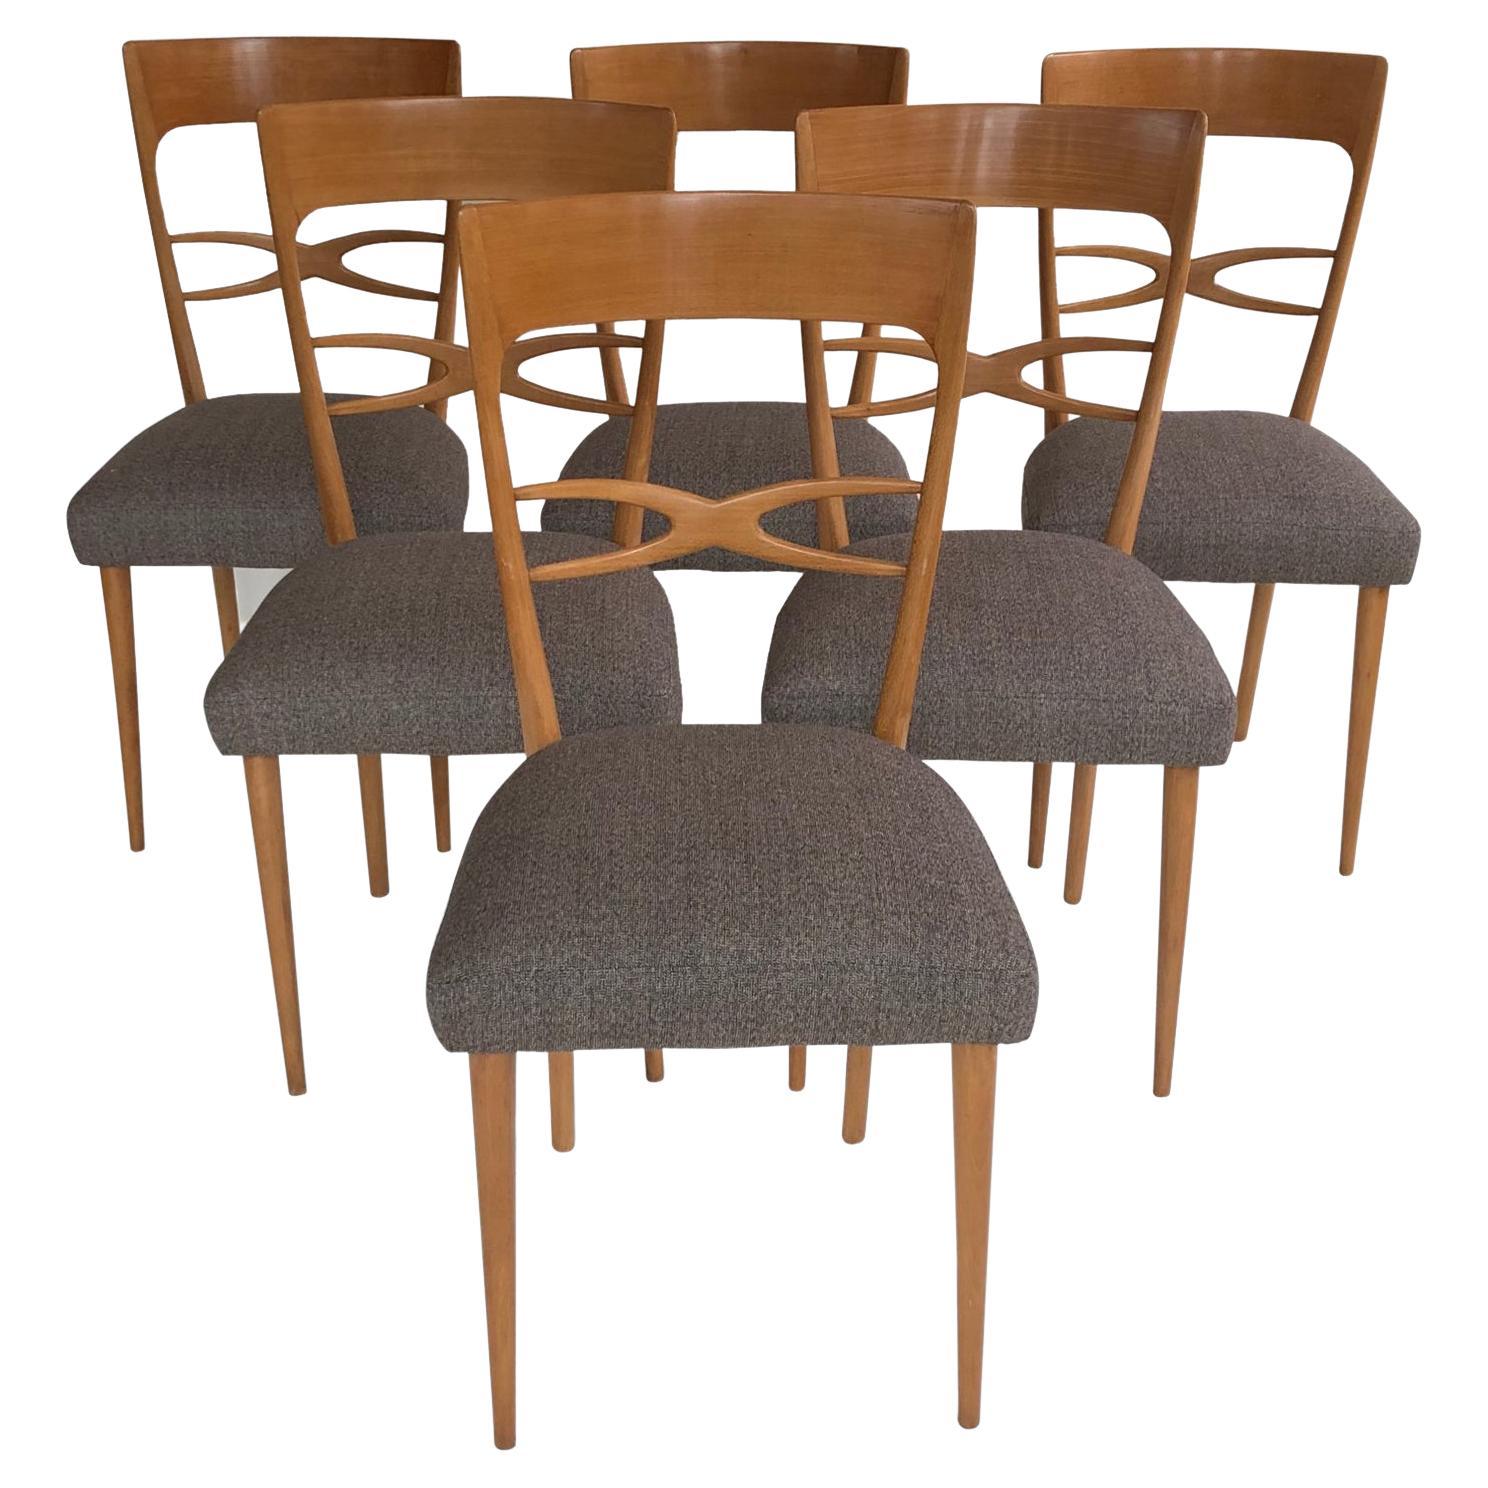 A set of six stylish and comfortable mid-century Italian dining room chairs, blond wood, grey upholstery, circa late 1940s - early 1950s. We often buy this model and could make up a larger set, please enquire.